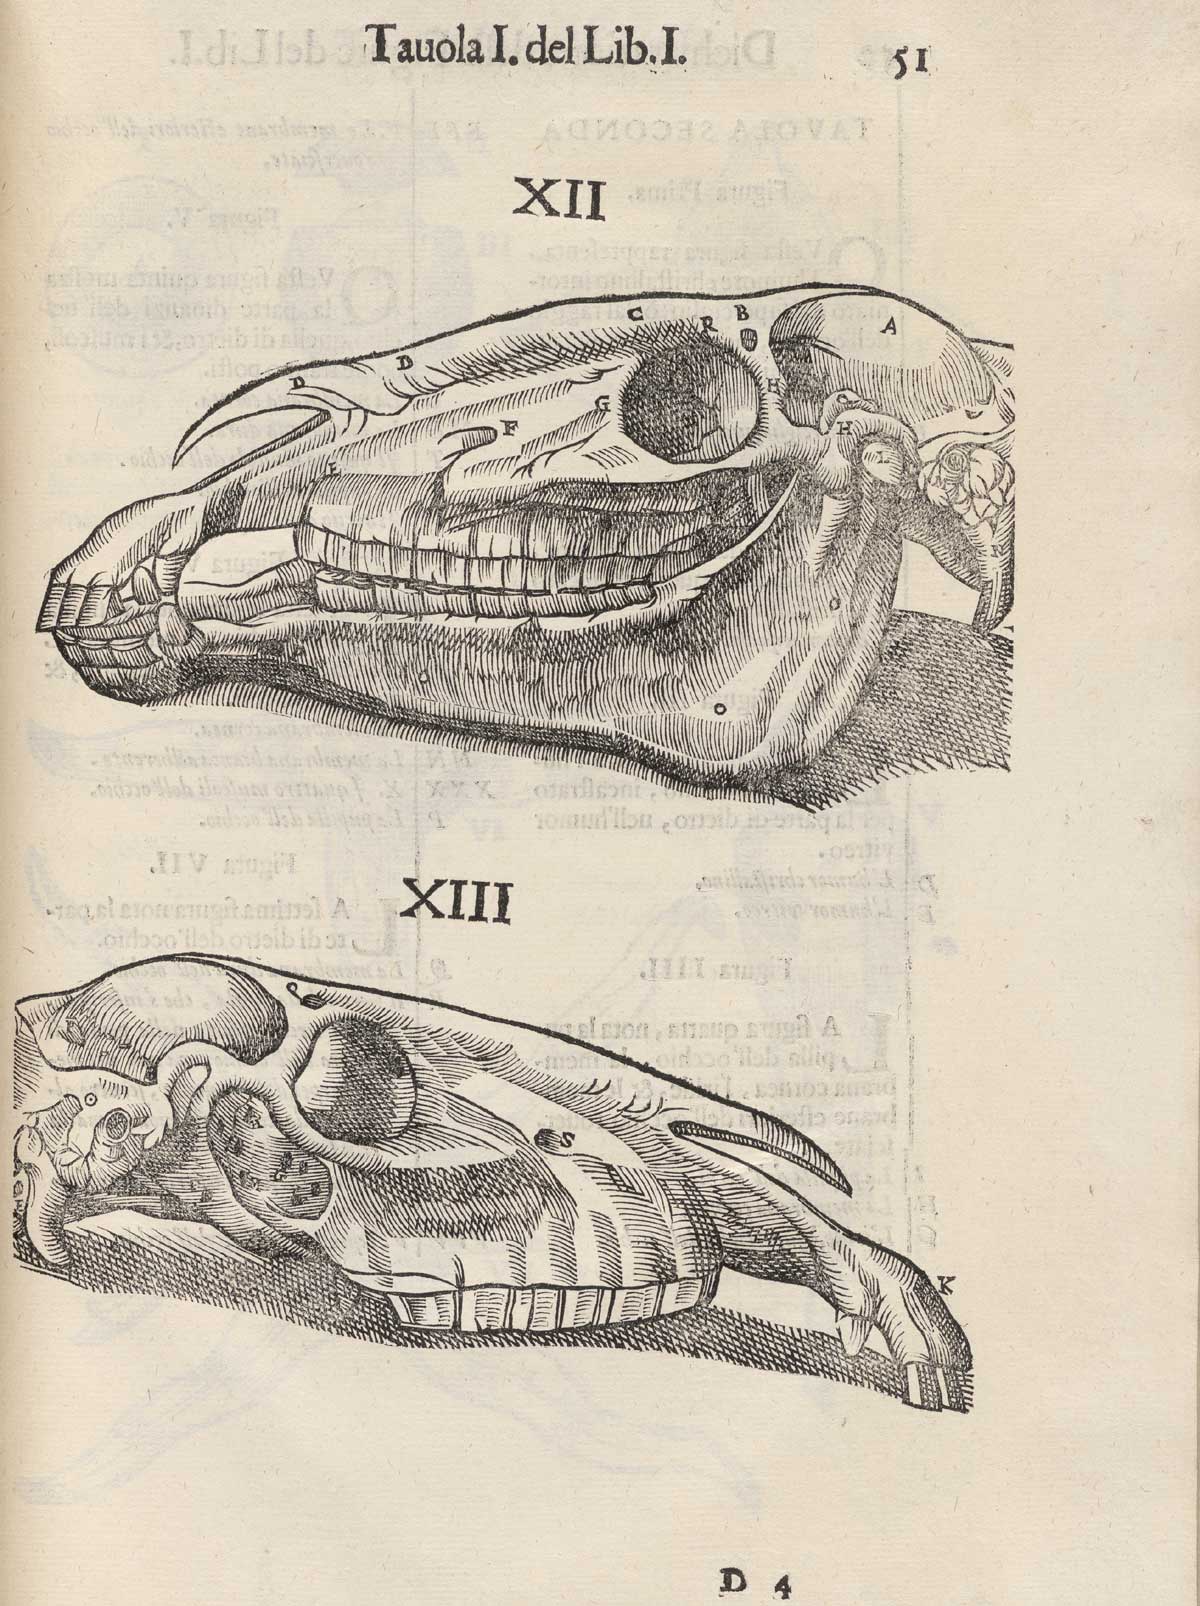 Page 51 of Ruini's Anatomia del cavallo, infermità, et suoi rimedii, featuring the side view of two horse skulls. The top skull faces to the left while the bottom skull faces right, but does not have the lower jaw.